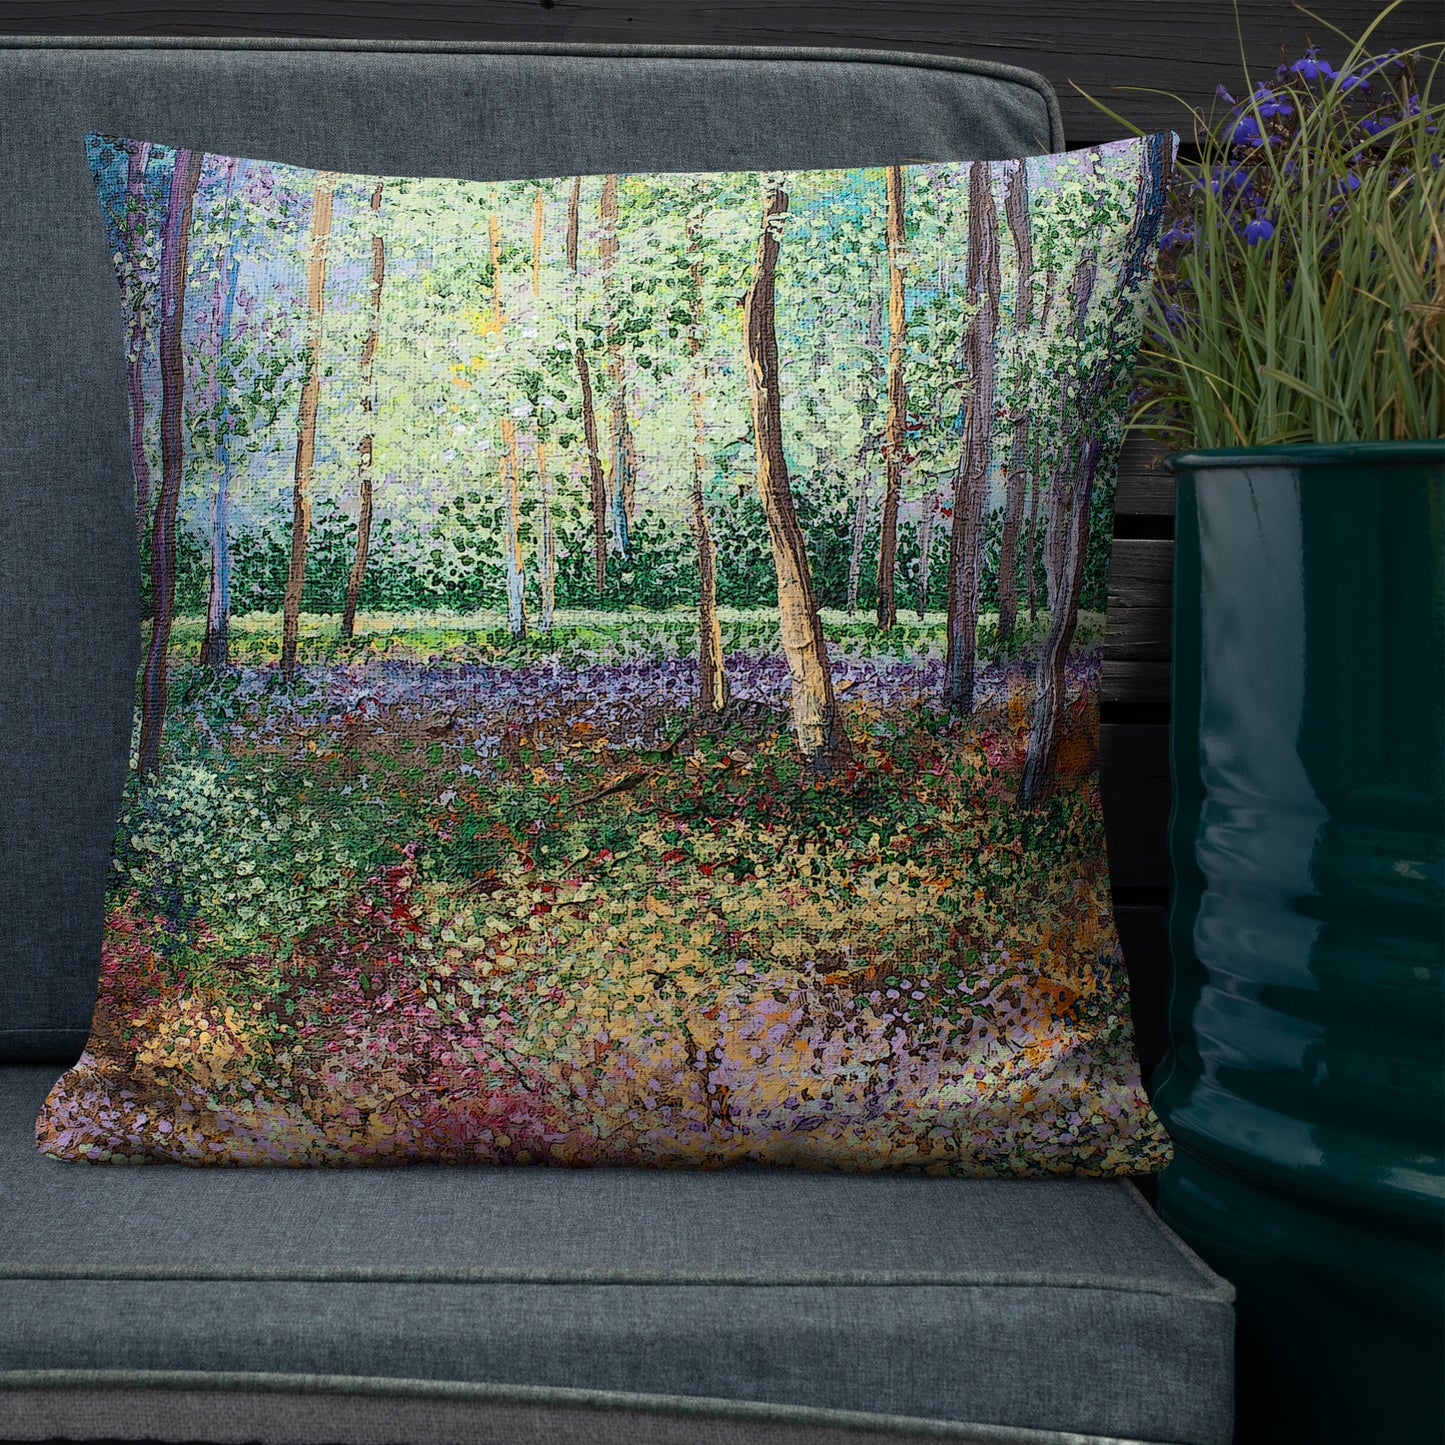 Walking in the Woods Cushion